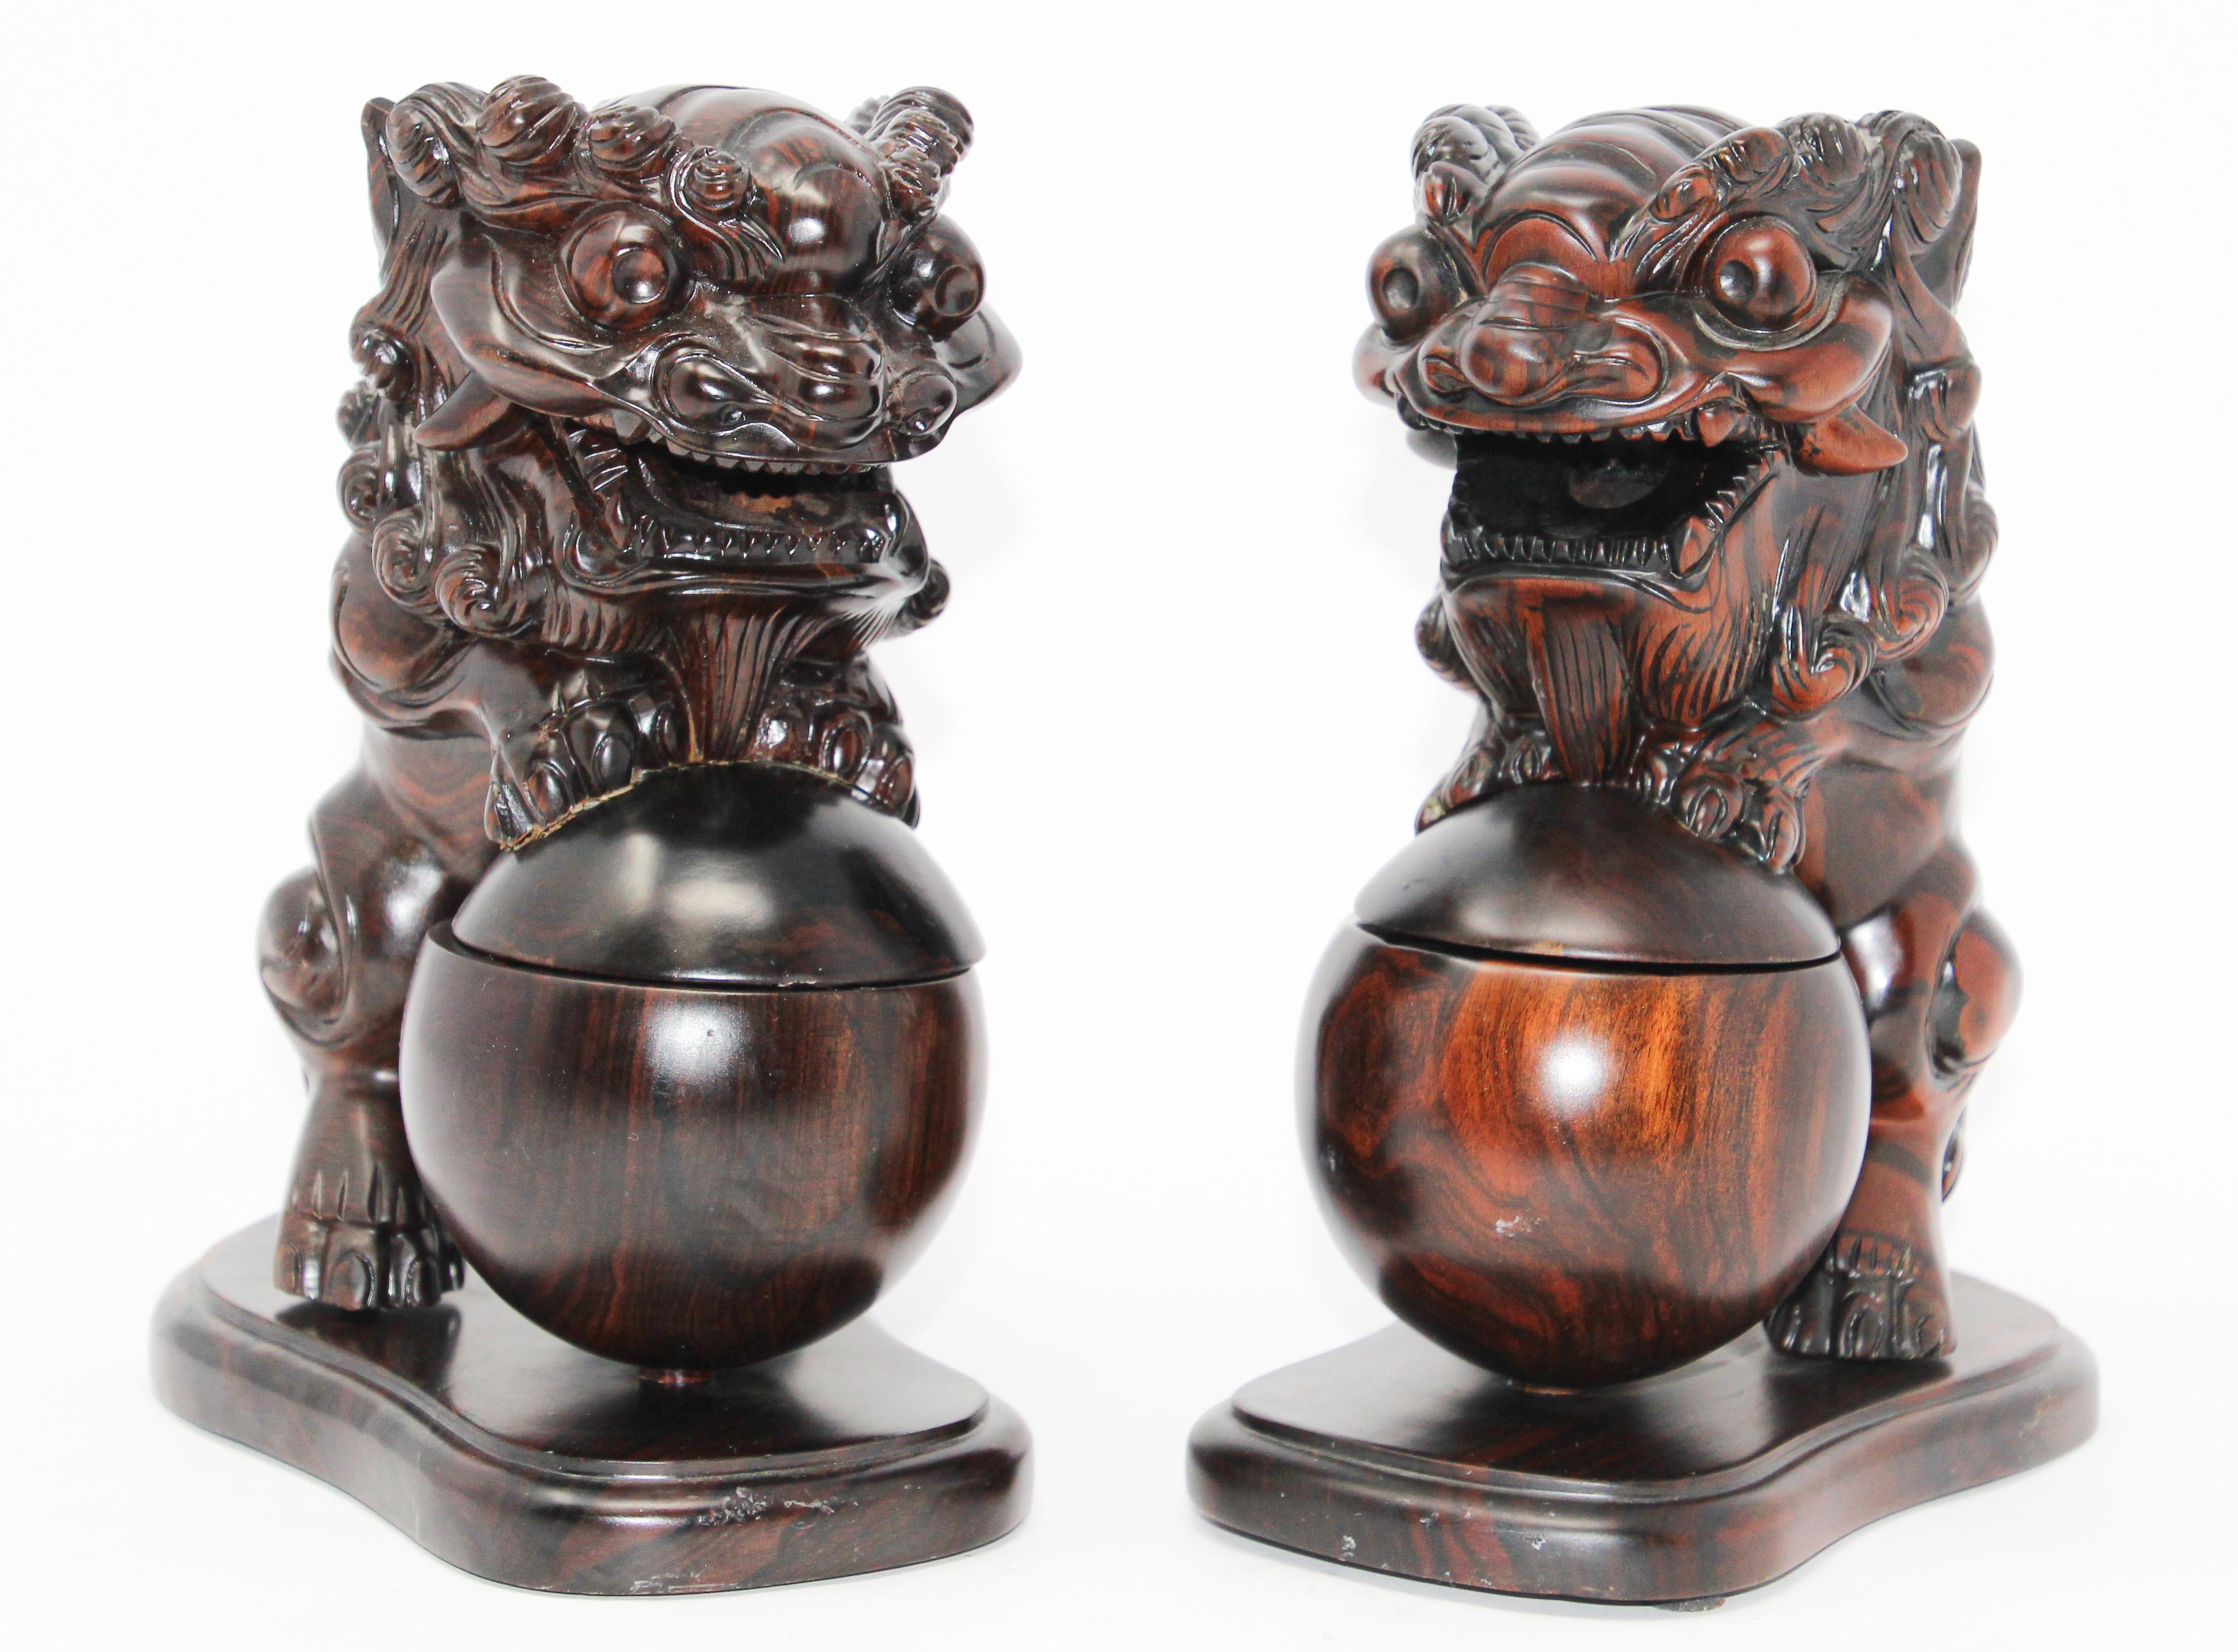 Two Chinese wood Foo Dogs Incense holder burners.
Featuring a pair of highly detailed lion foo dogs, one male and one female which were thought to protect the home from harmful spiritual influences and harmful people that might be a threat.
The